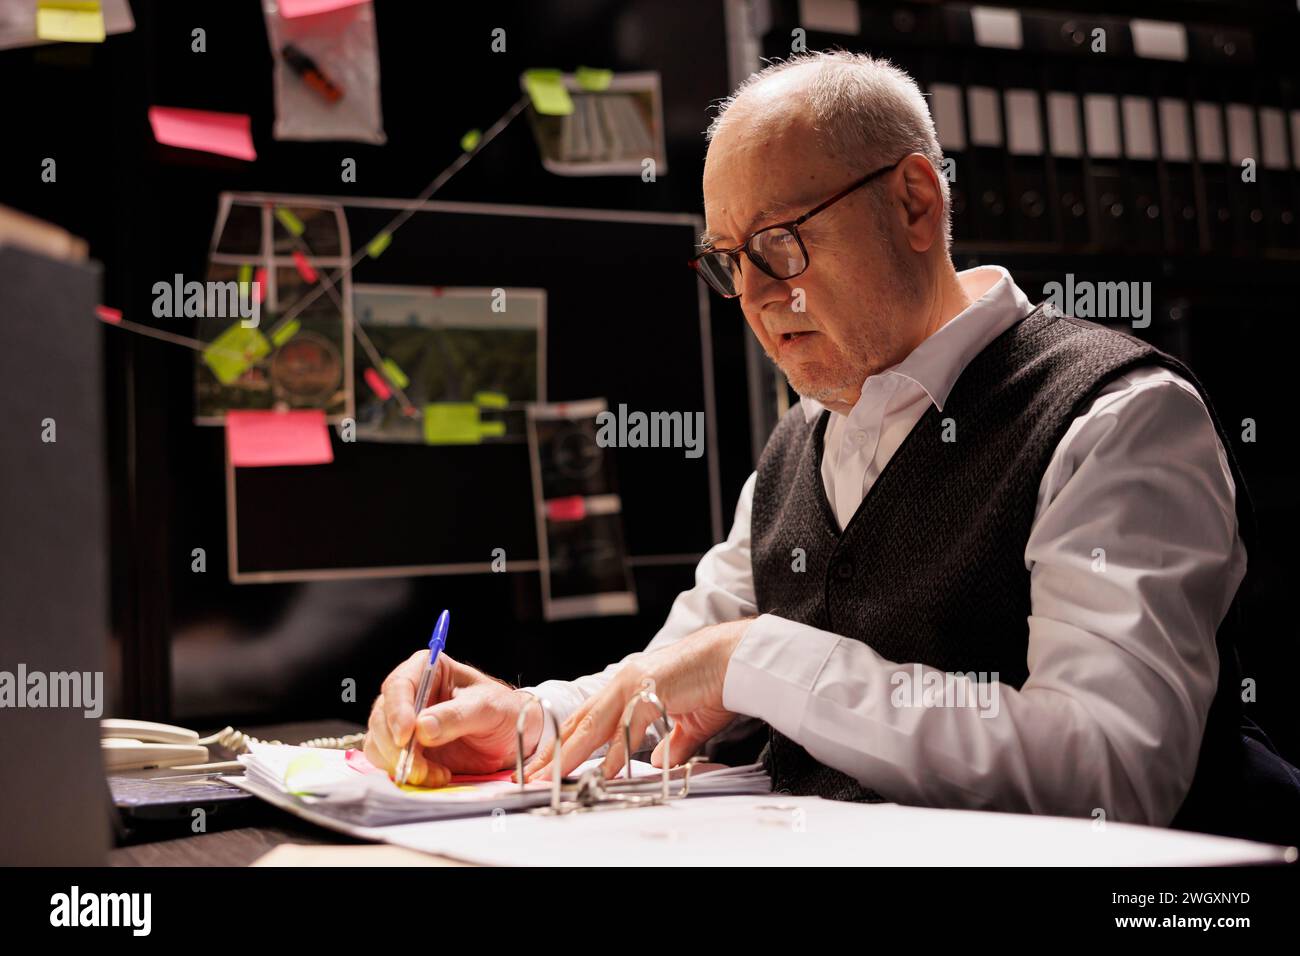 Tired elderly police officer sitting at desk in evidence room, analyzing late at night at criminology report. Overworked private detectives working at missing person case, checking victim files Stock Photo